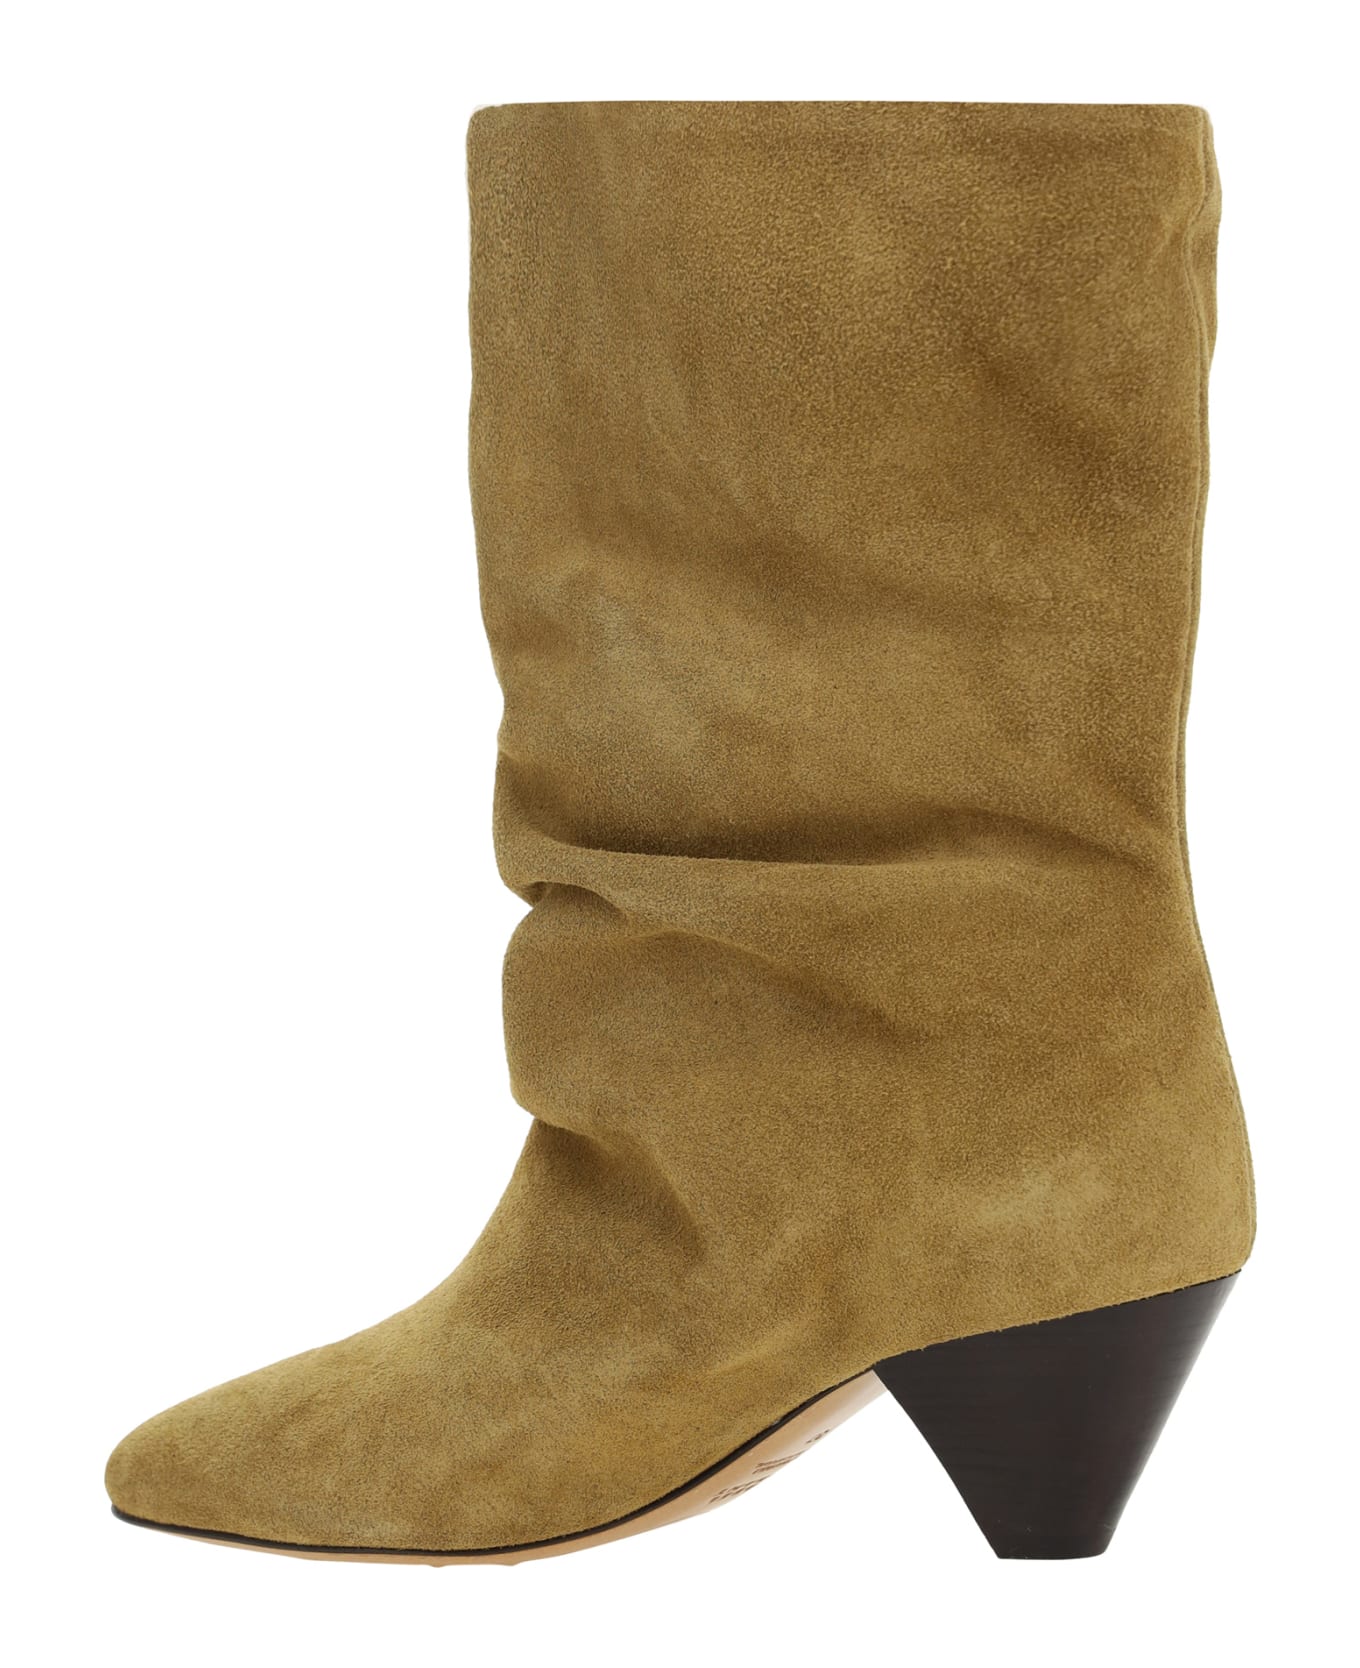 Isabel Marant Reachi Ankle Boots - Brown